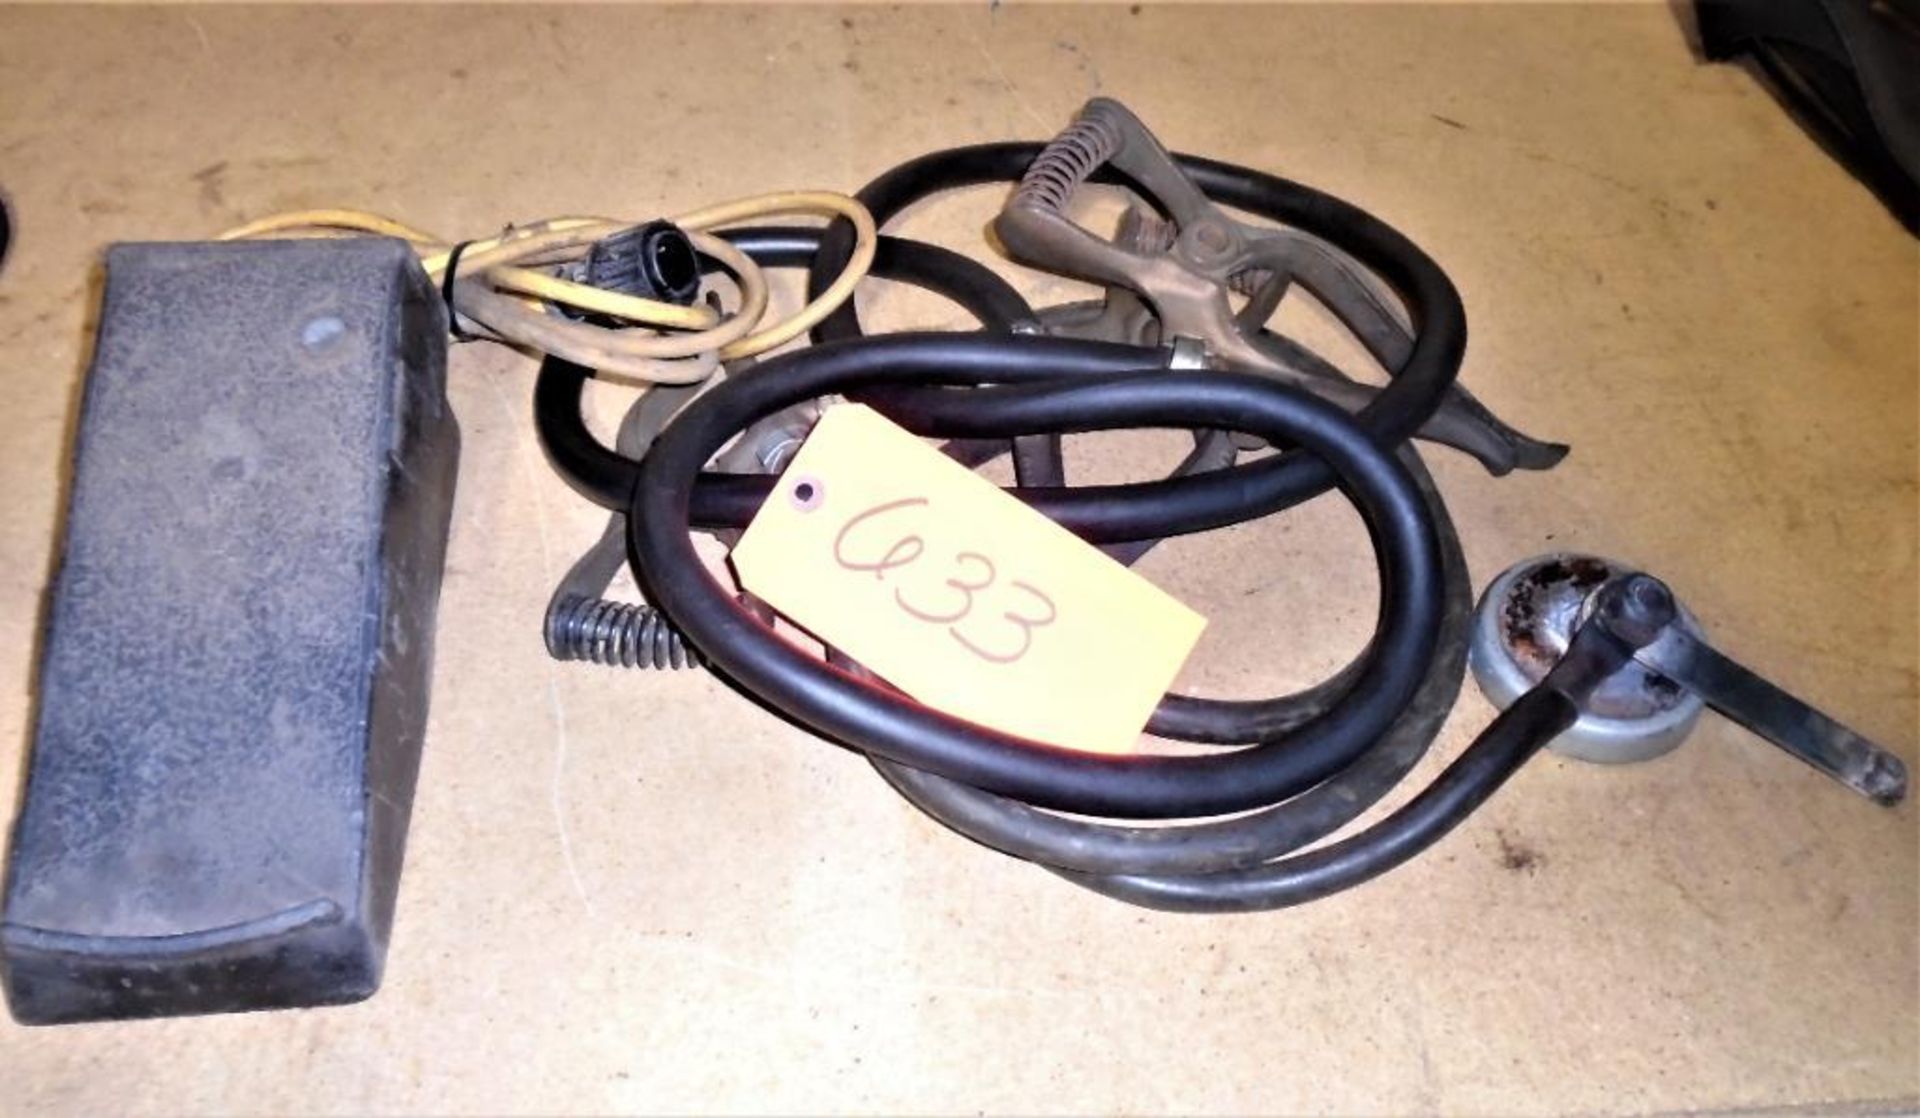 Miller HFCs-14 Foot Pedal and (2) Grounding Clamp Cables